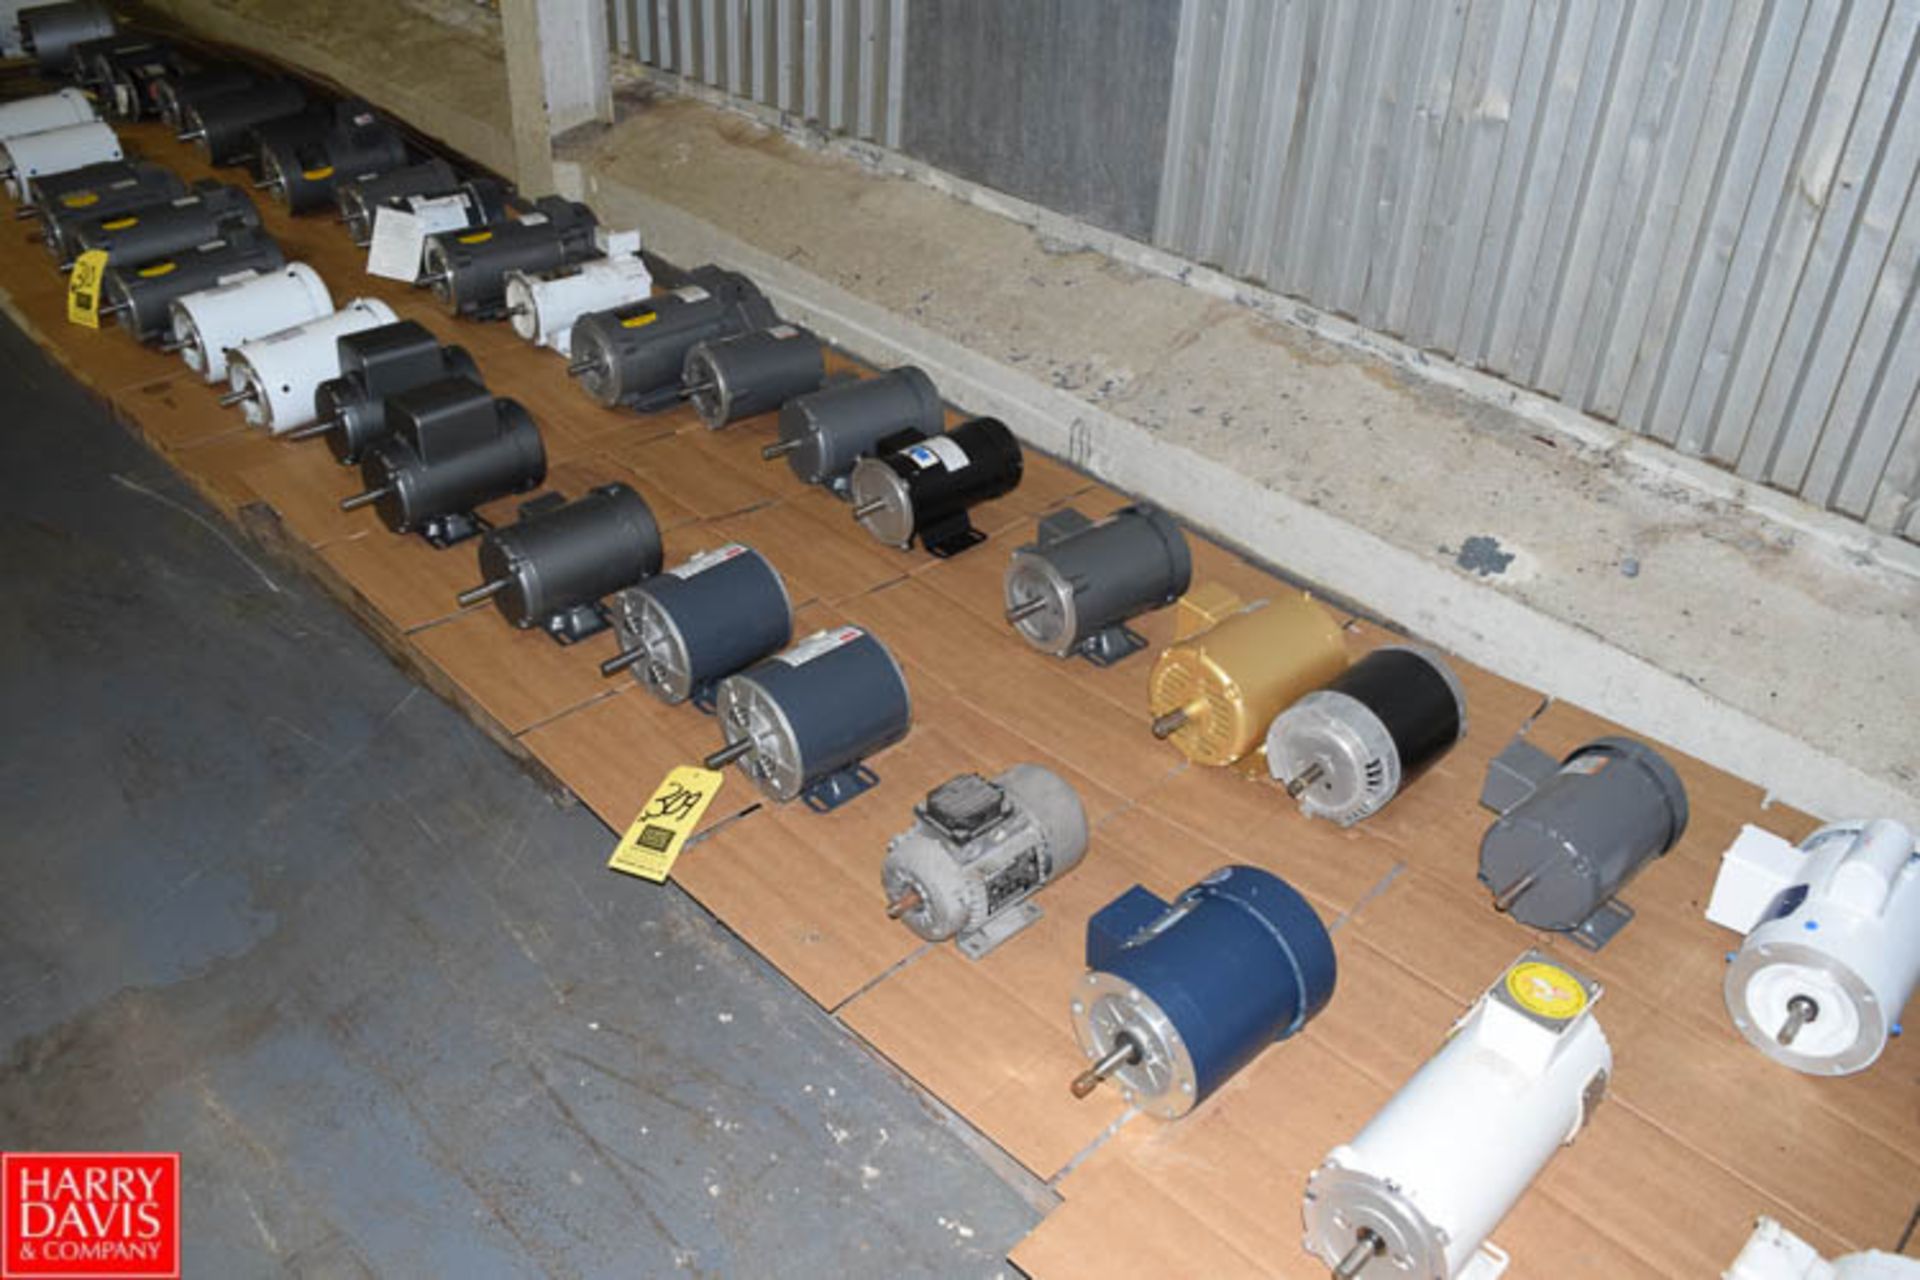 NEW Dayton, Baldor and other Motors (Up to 1 HP) - Rigging Fee: $ Please Contact Rigger for Pricing